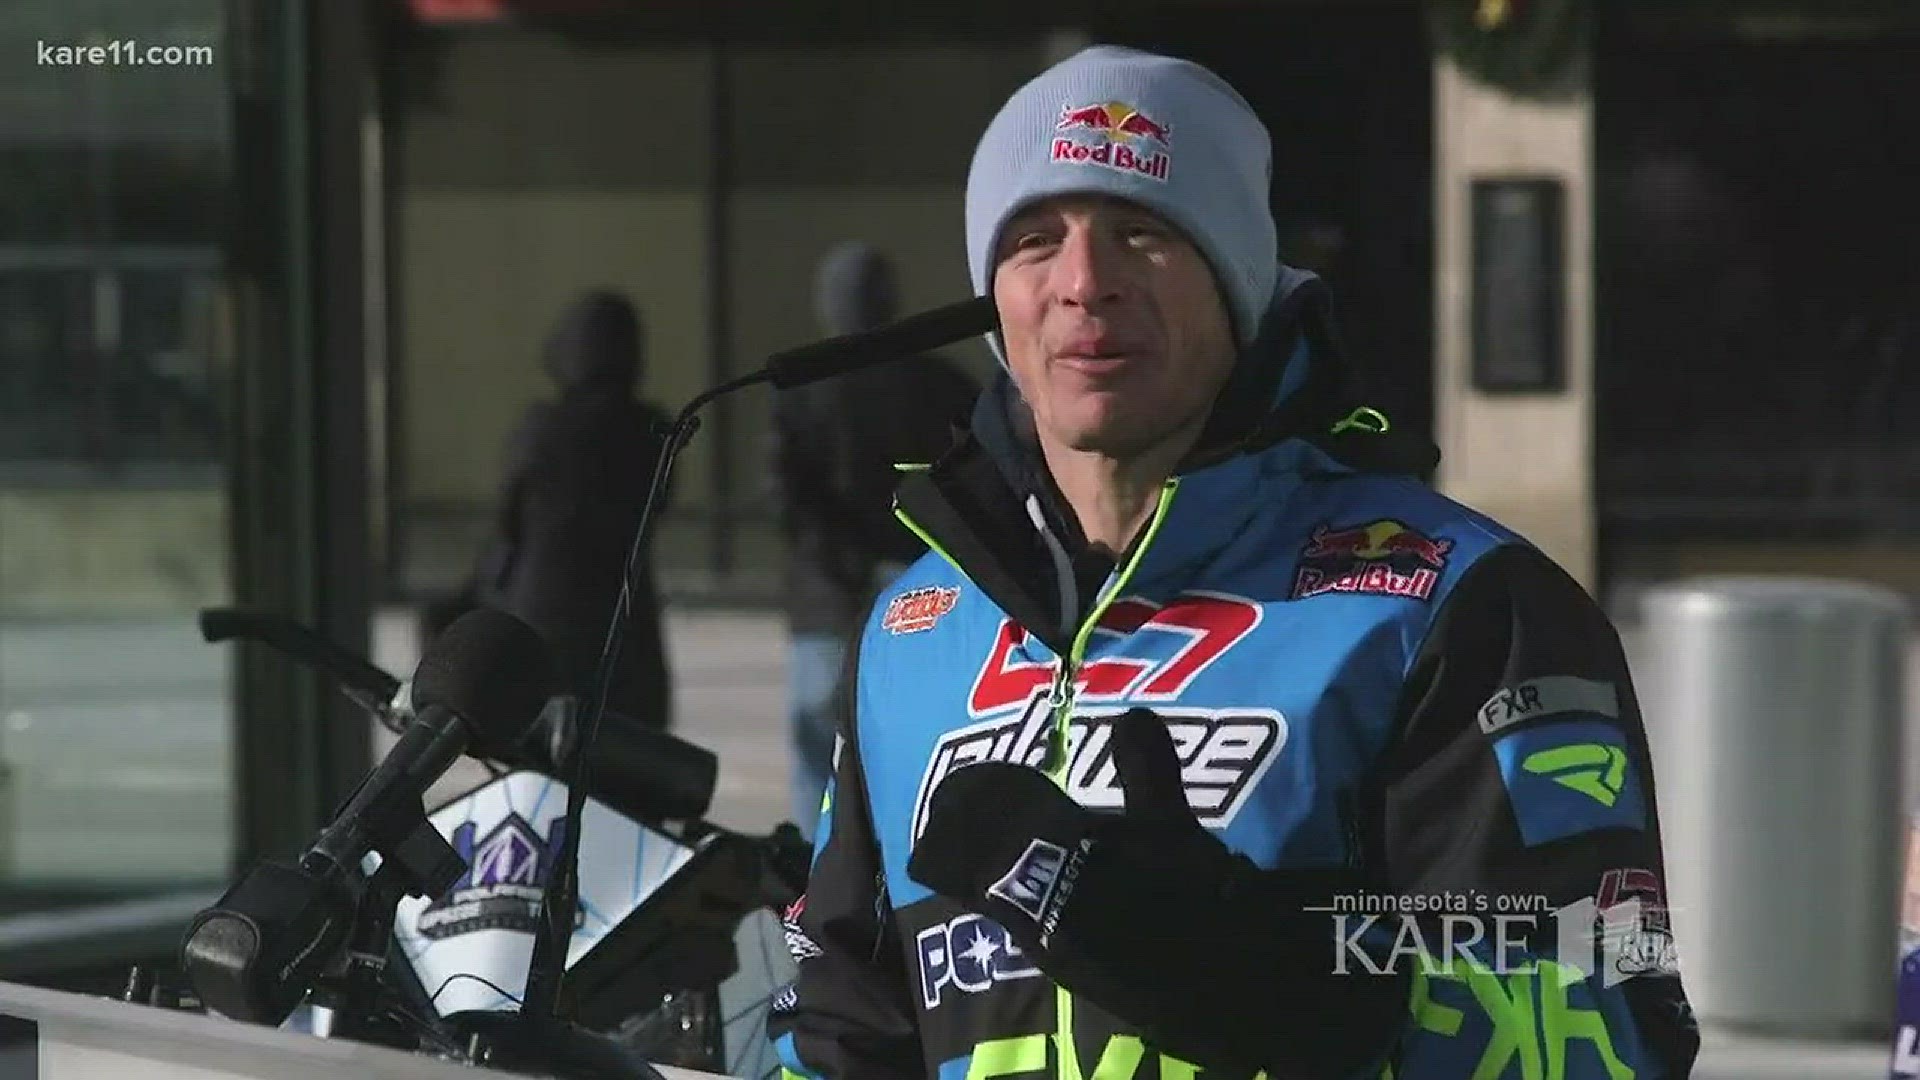 Levi LaVallee to perform 'Super' stunt over Nicollet Mall